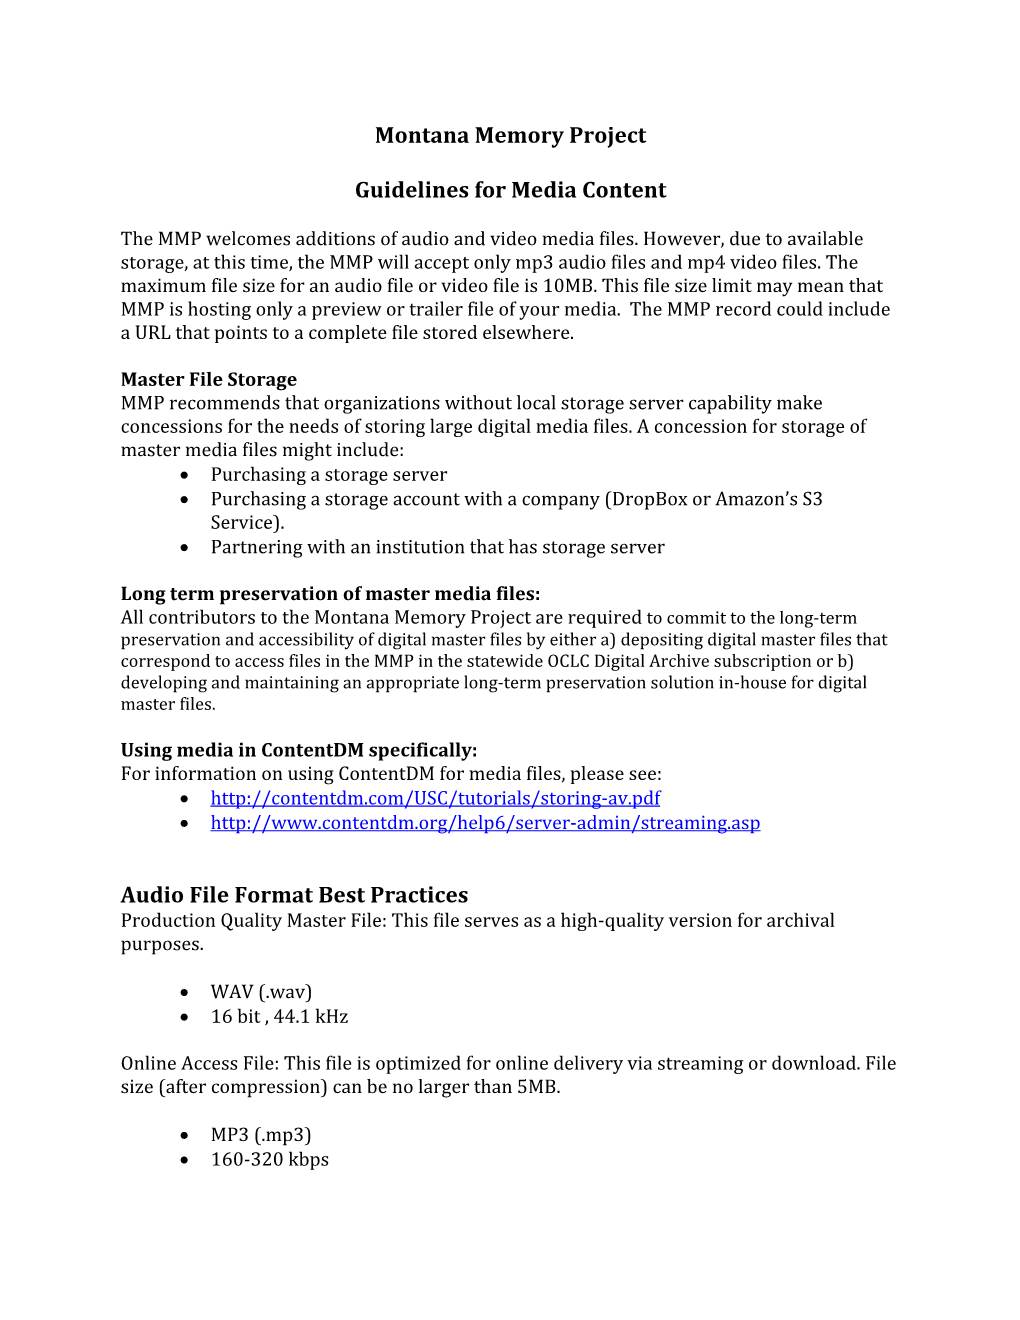 Montana Memory Project Guidelines for Media Content Audio File Format Best Practices